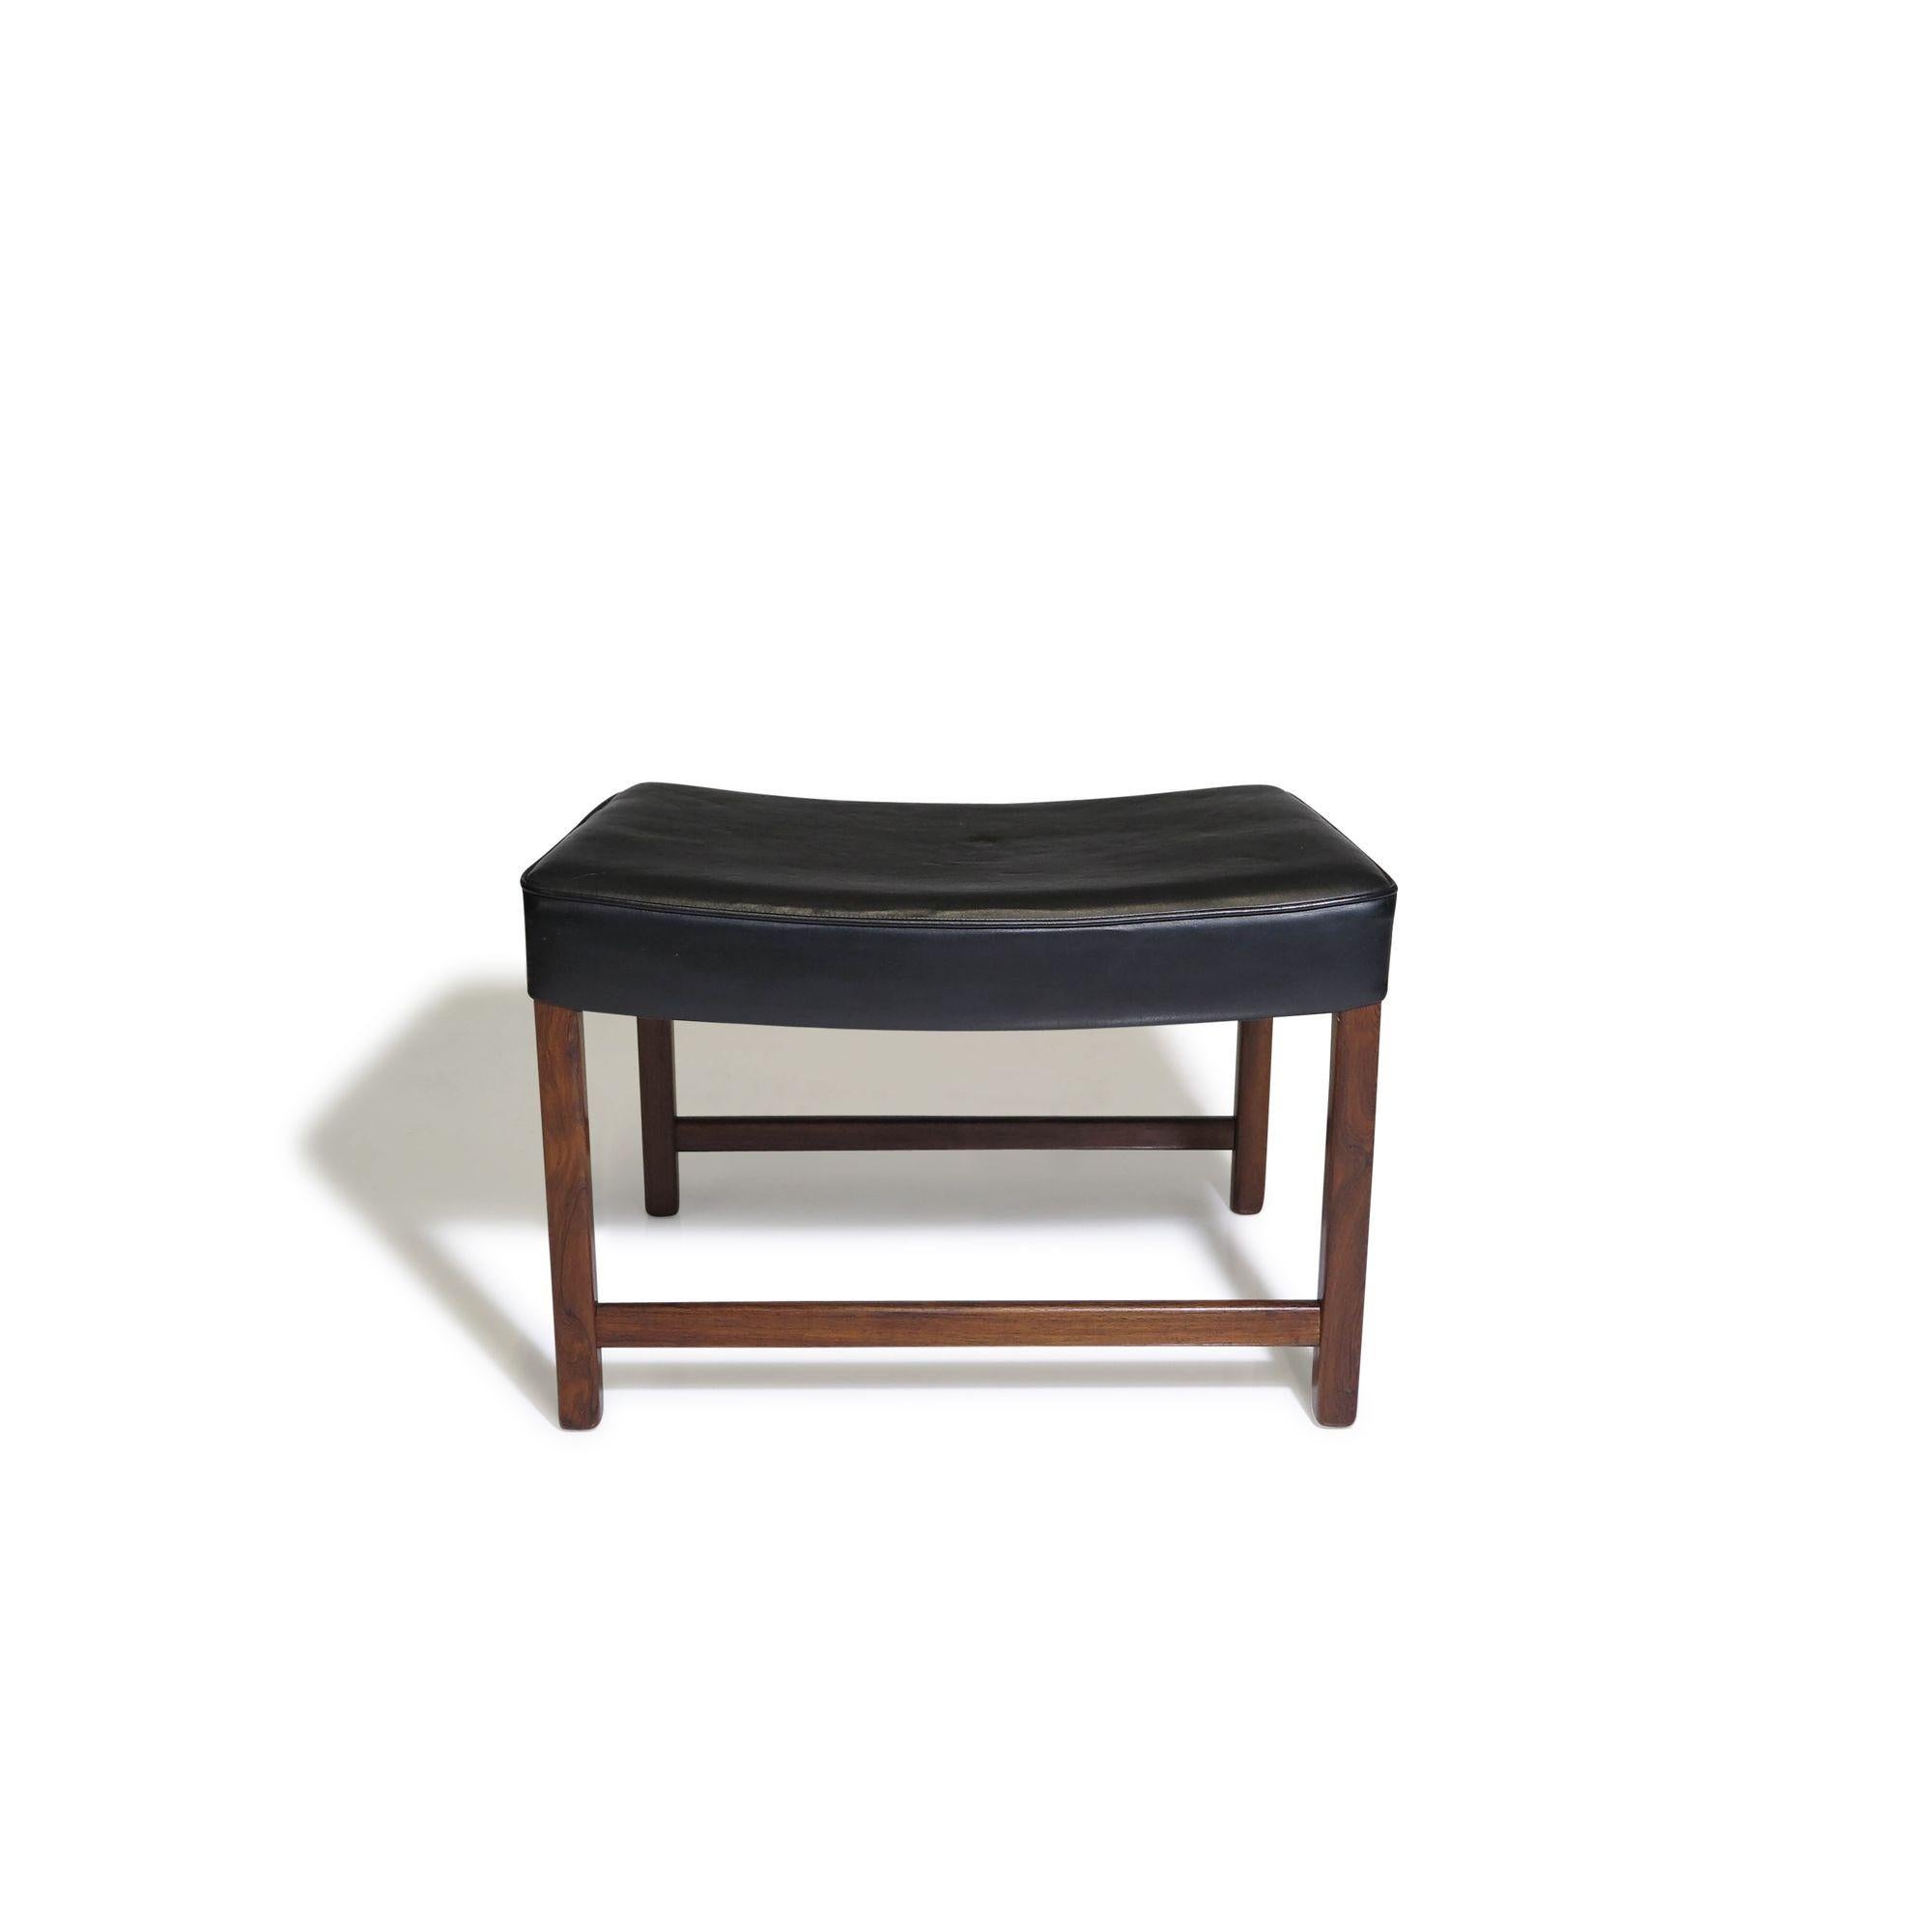 Fredrik Kayser Danish Rosewood Ottoman or Bench in Black Leather For Sale 1